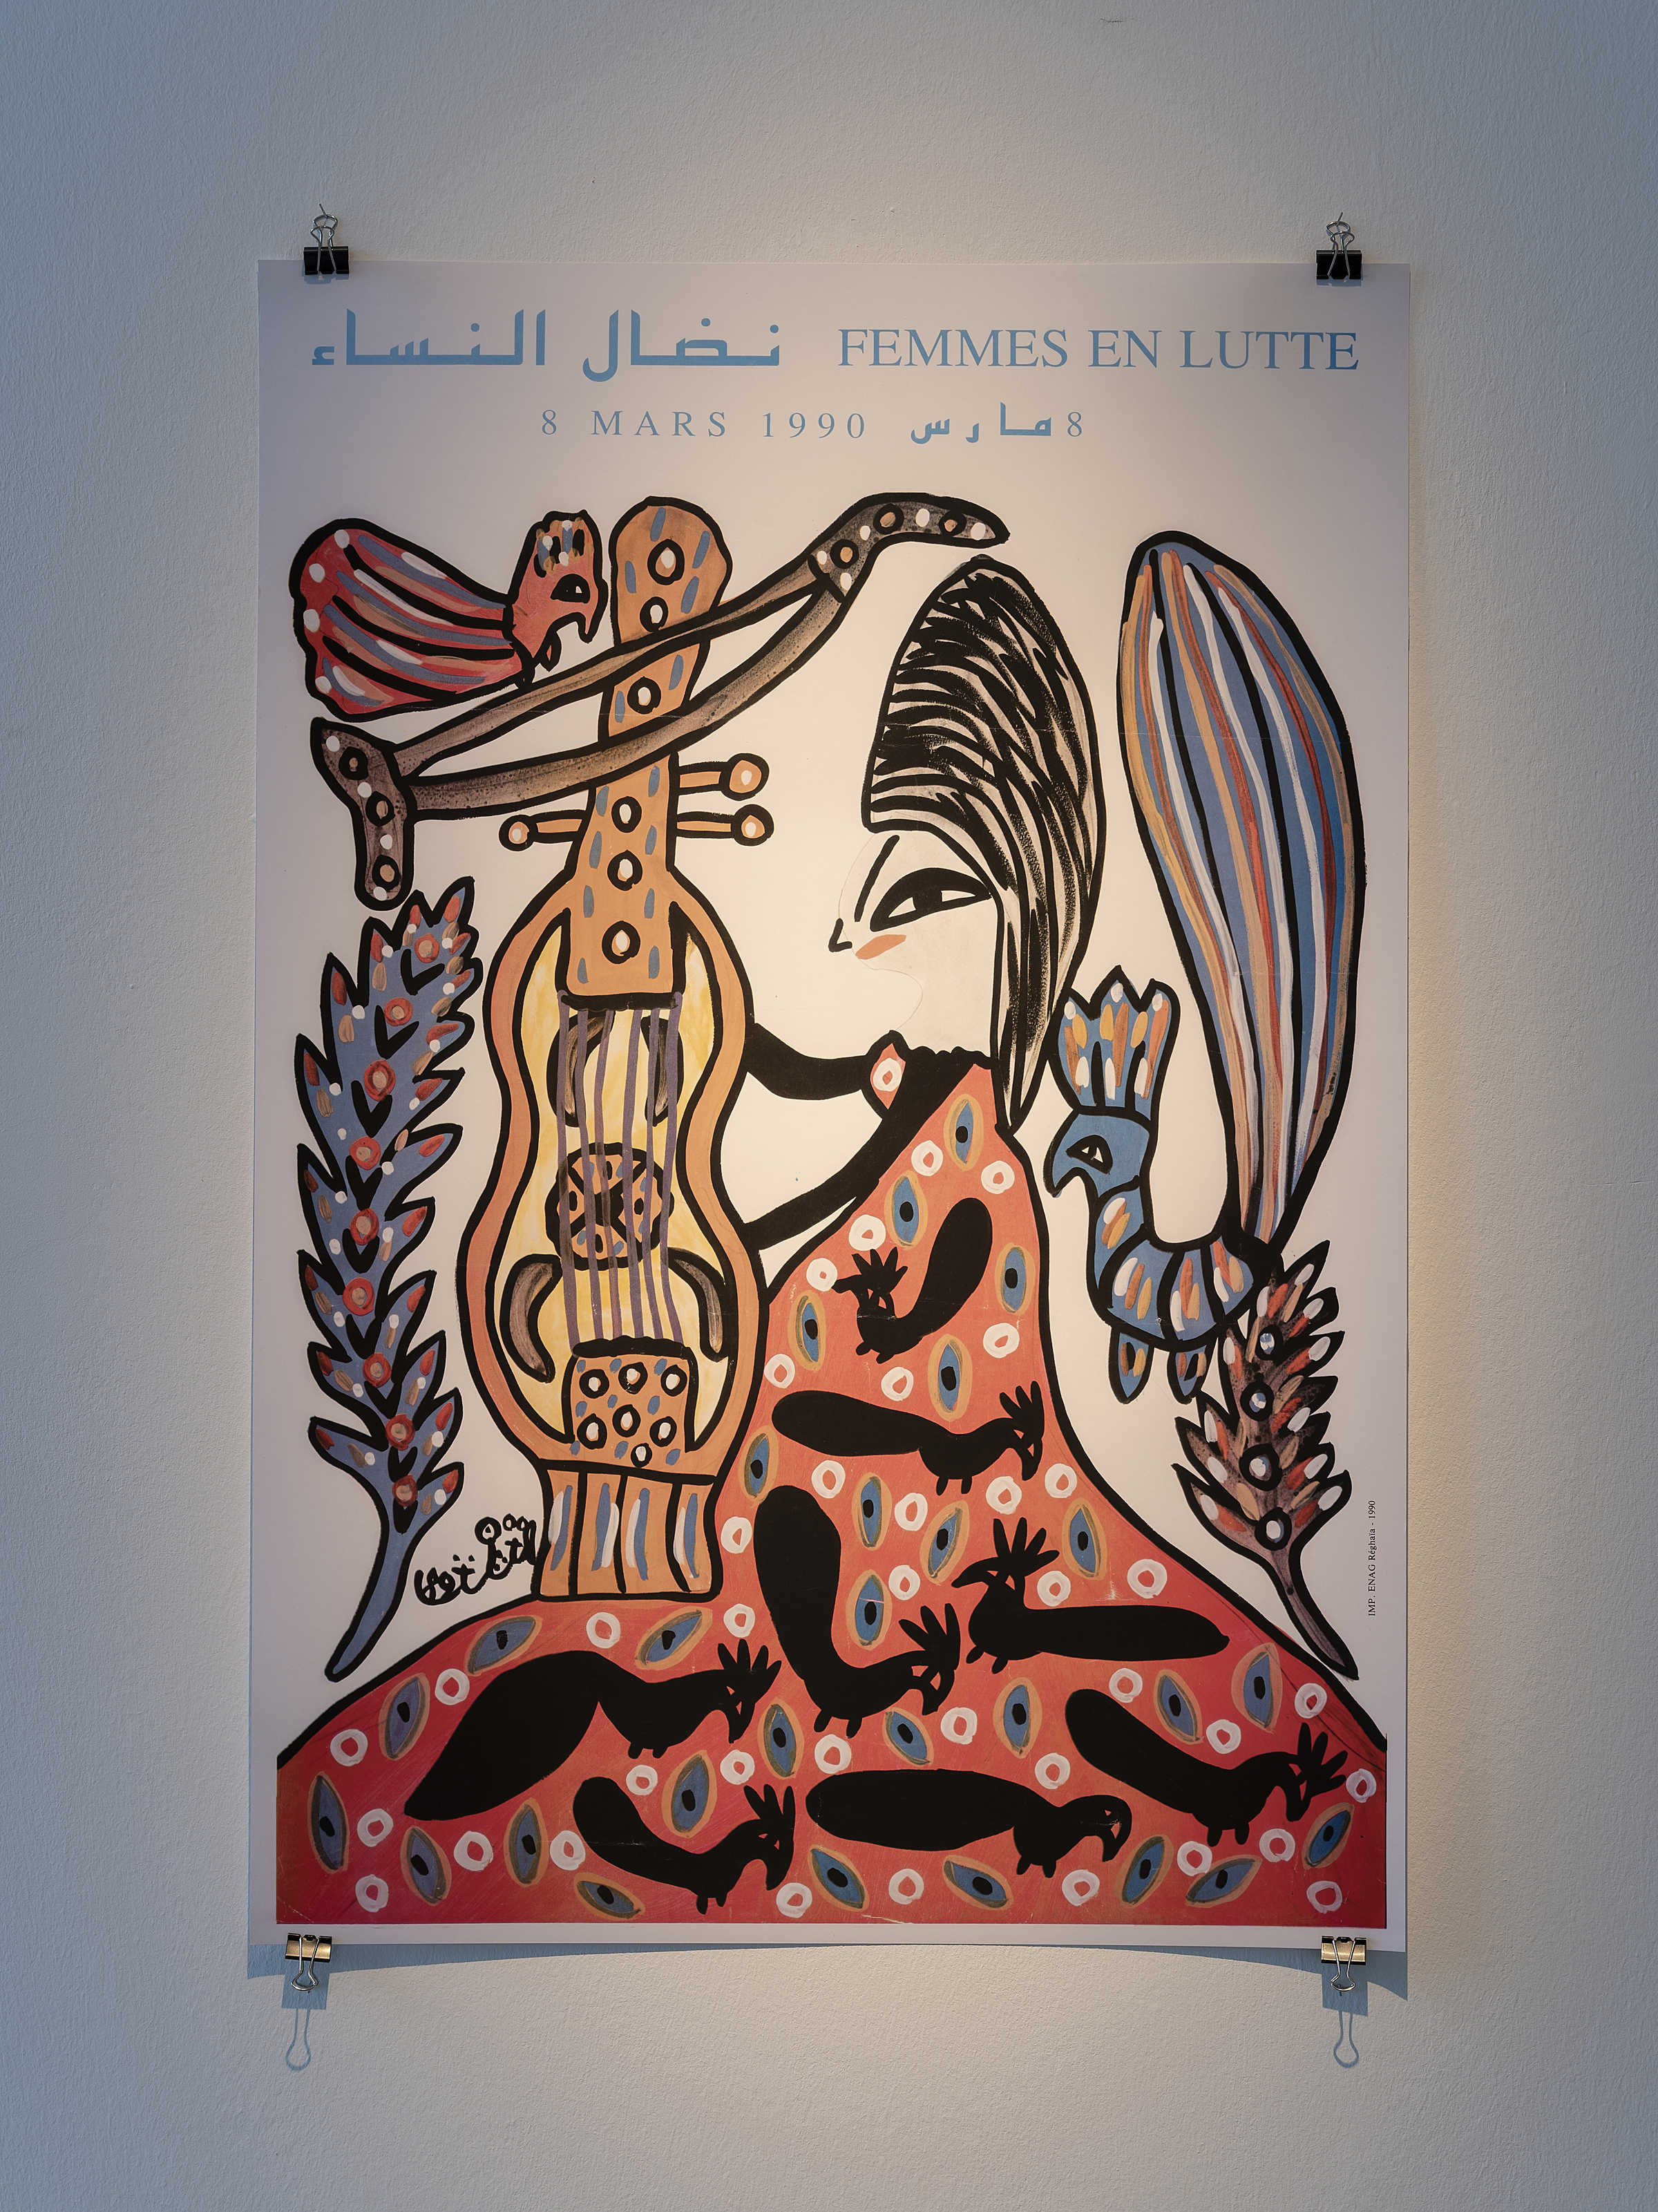 documenta fifteen: Archives des luttes des femmes en Algérie, Femmes en lutte – 8 mars 1990 (Woman in struggle), Posters created for the 8th of March 1990 in Algiers by several women’s organizations, installation view, Fridericianum, Kassel, July 22, 2022, photo: Nicolas Wefers